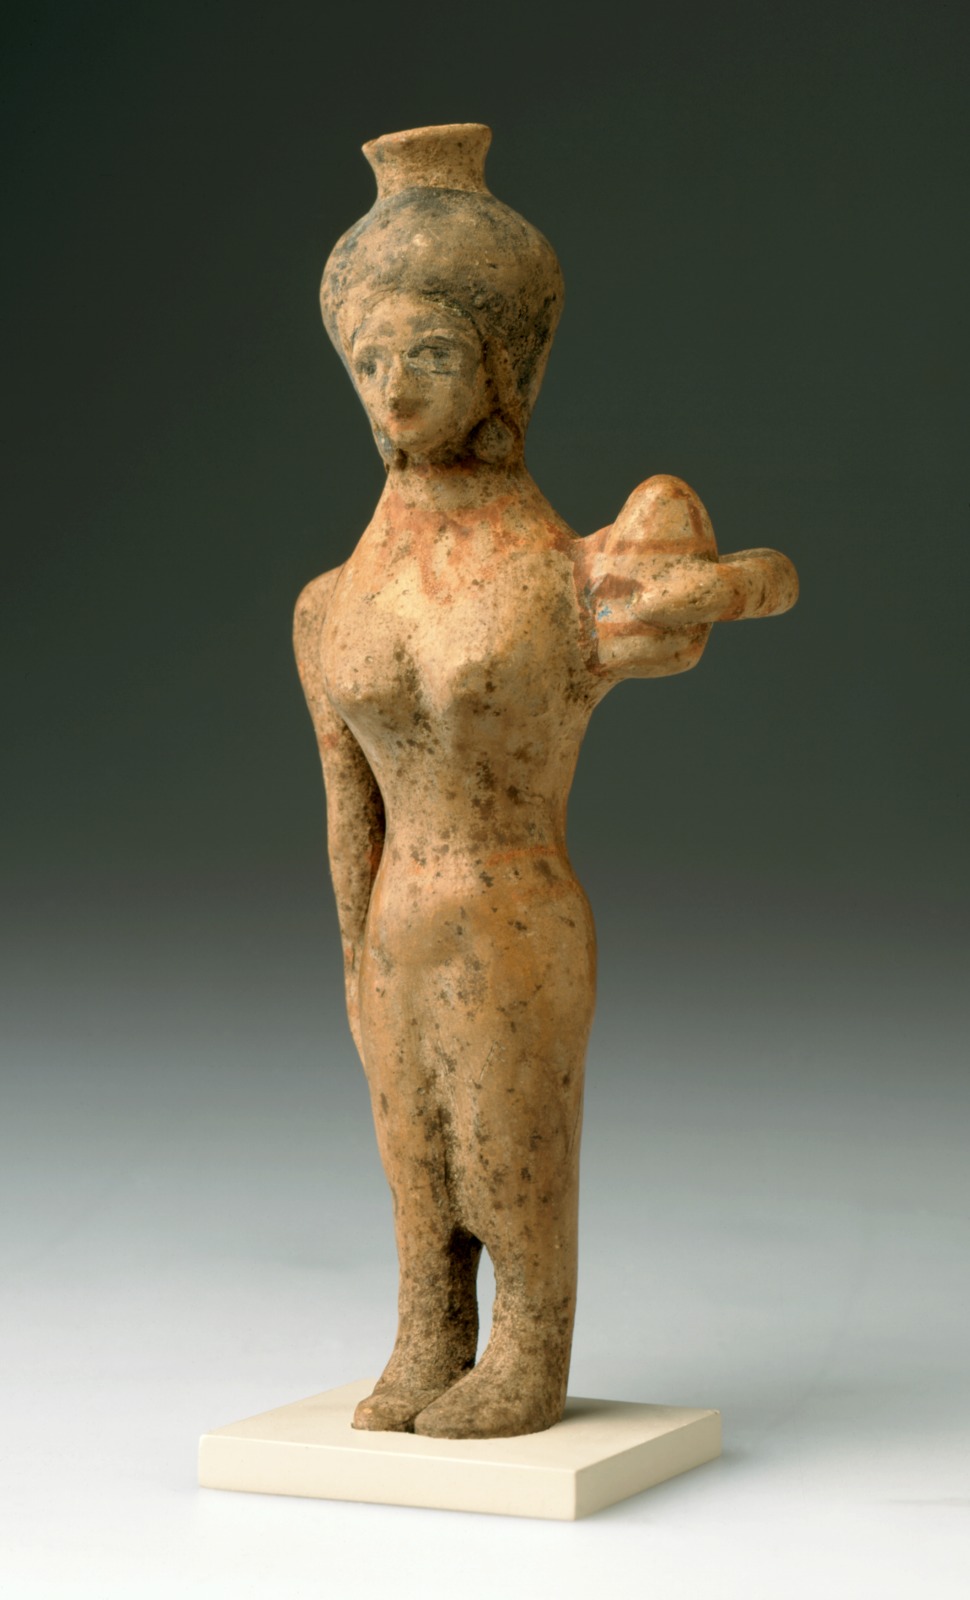 Vessel in Shape of Foreign Woman with Vase